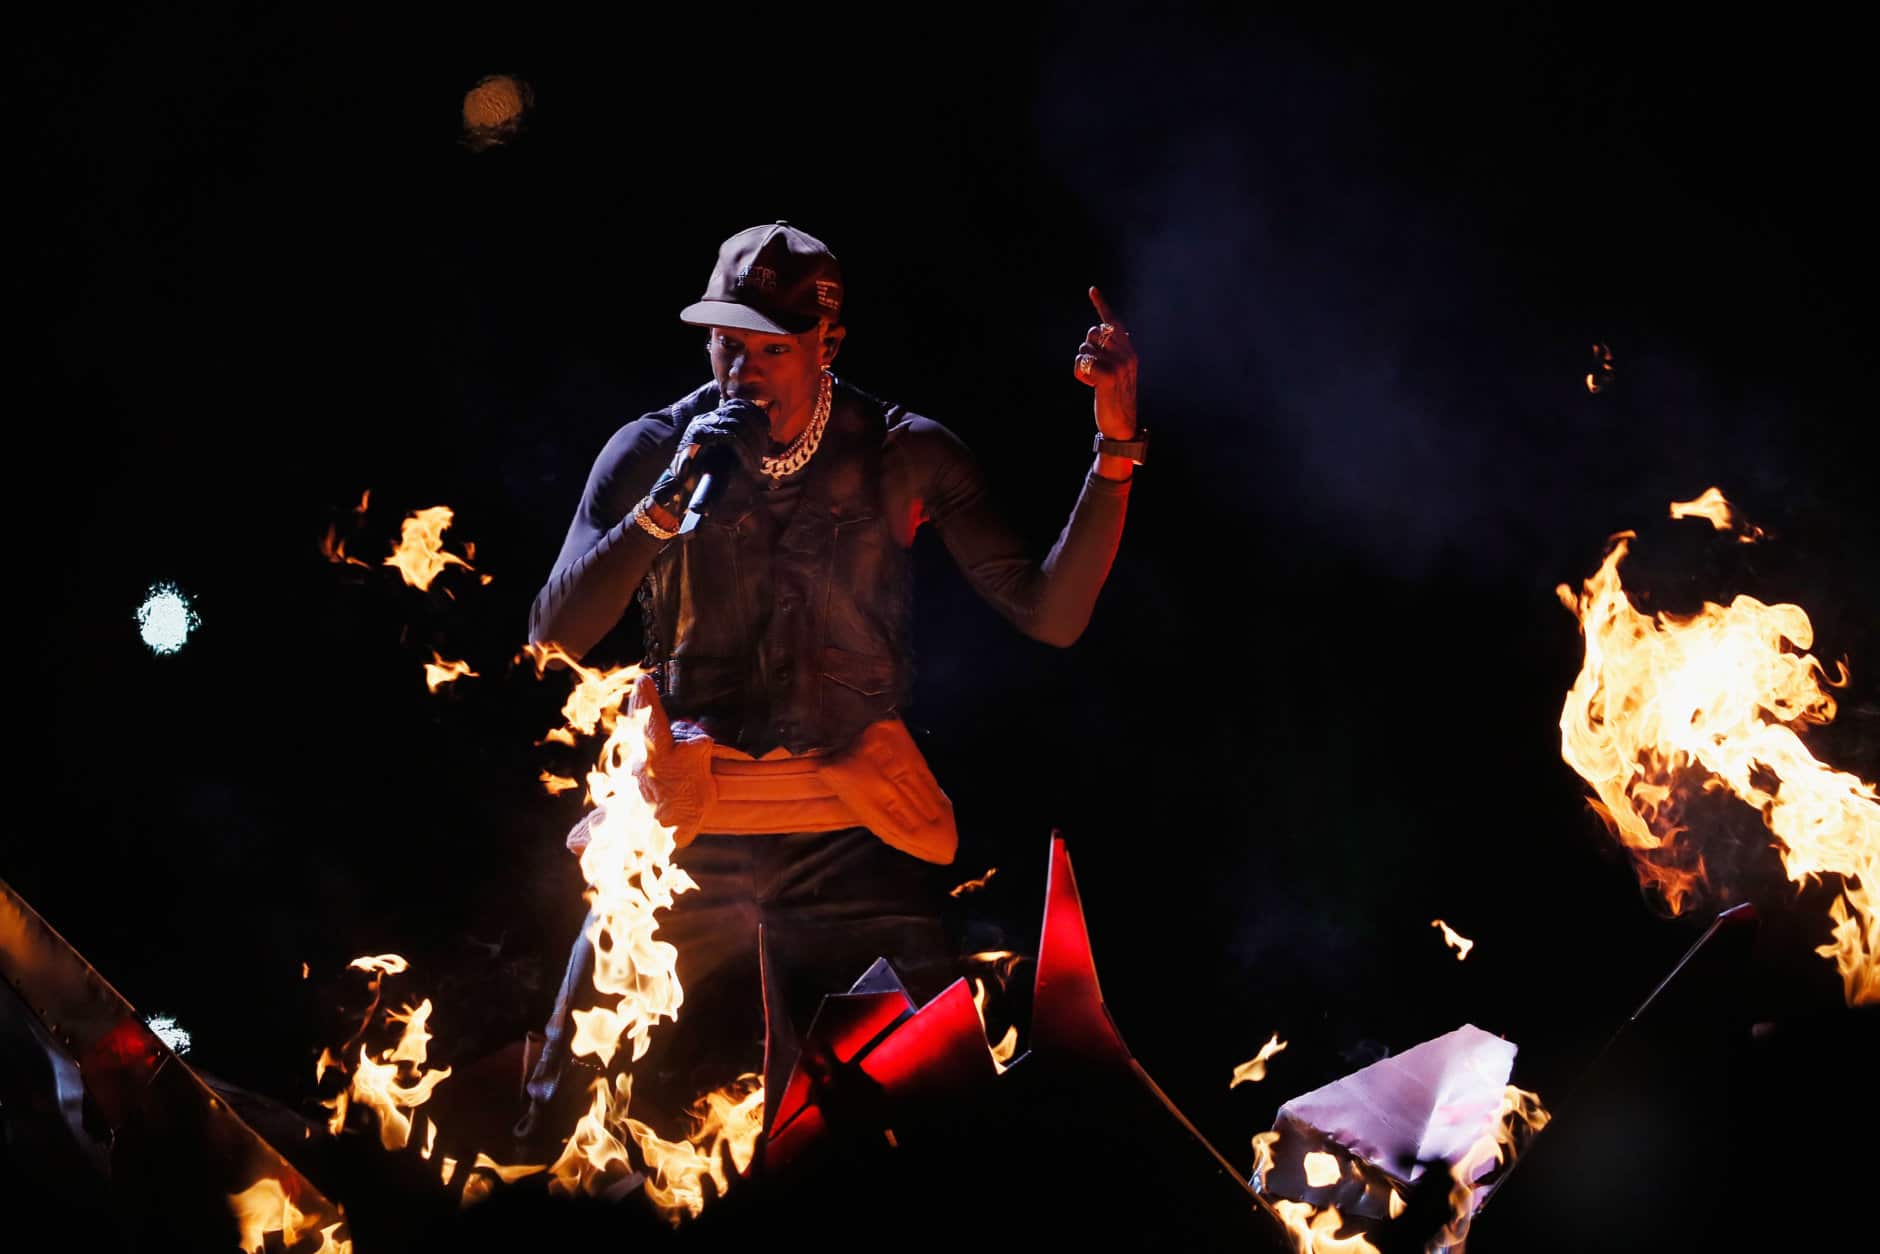 ATLANTA, GA - FEBRUARY 03:  Travis Scott performs during the Pepsi Super Bowl LIII Halftime Show at Mercedes-Benz Stadium on February 3, 2019 in Atlanta, Georgia.  (Photo by Kevin C. Cox/Getty Images)